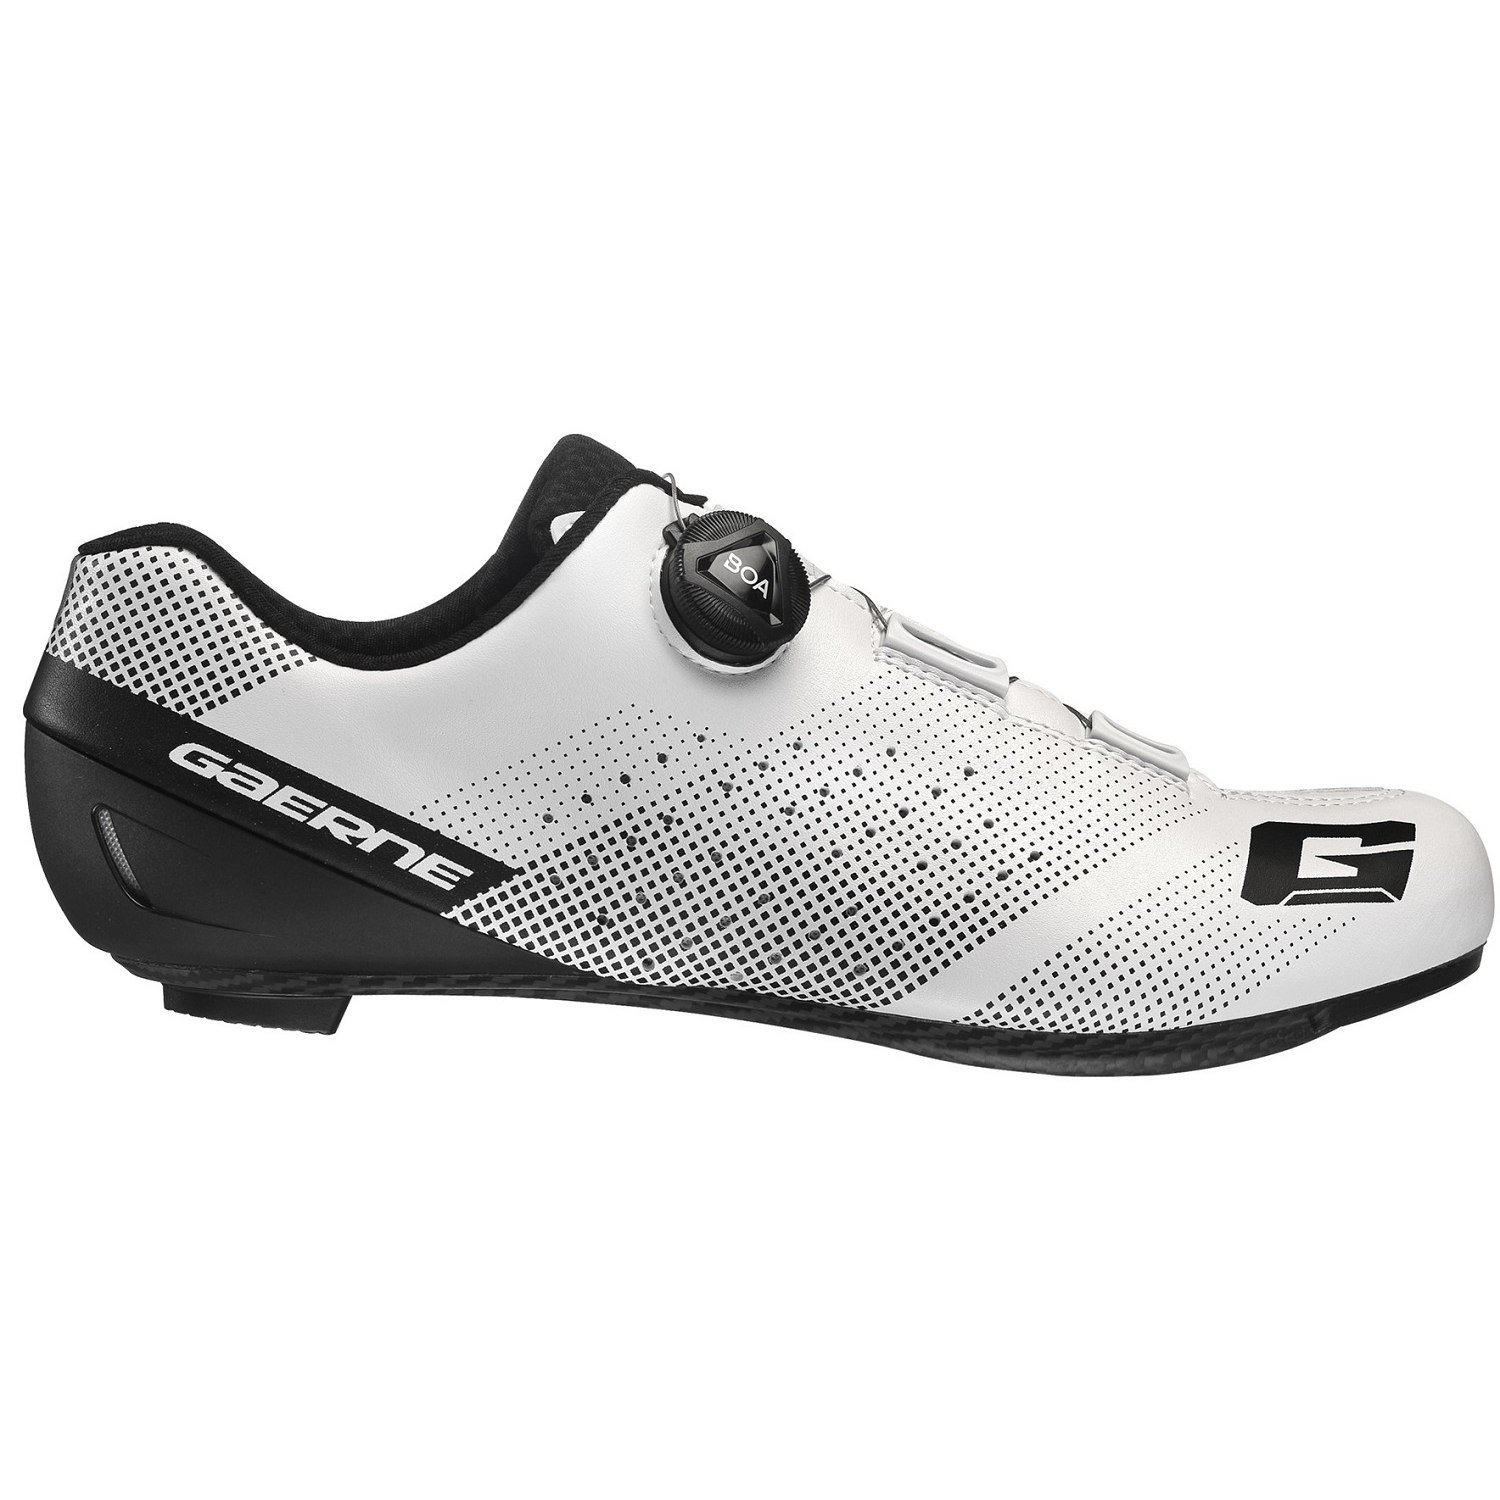 Picture of Gaerne Carbon G. Tornado Road Shoes - white